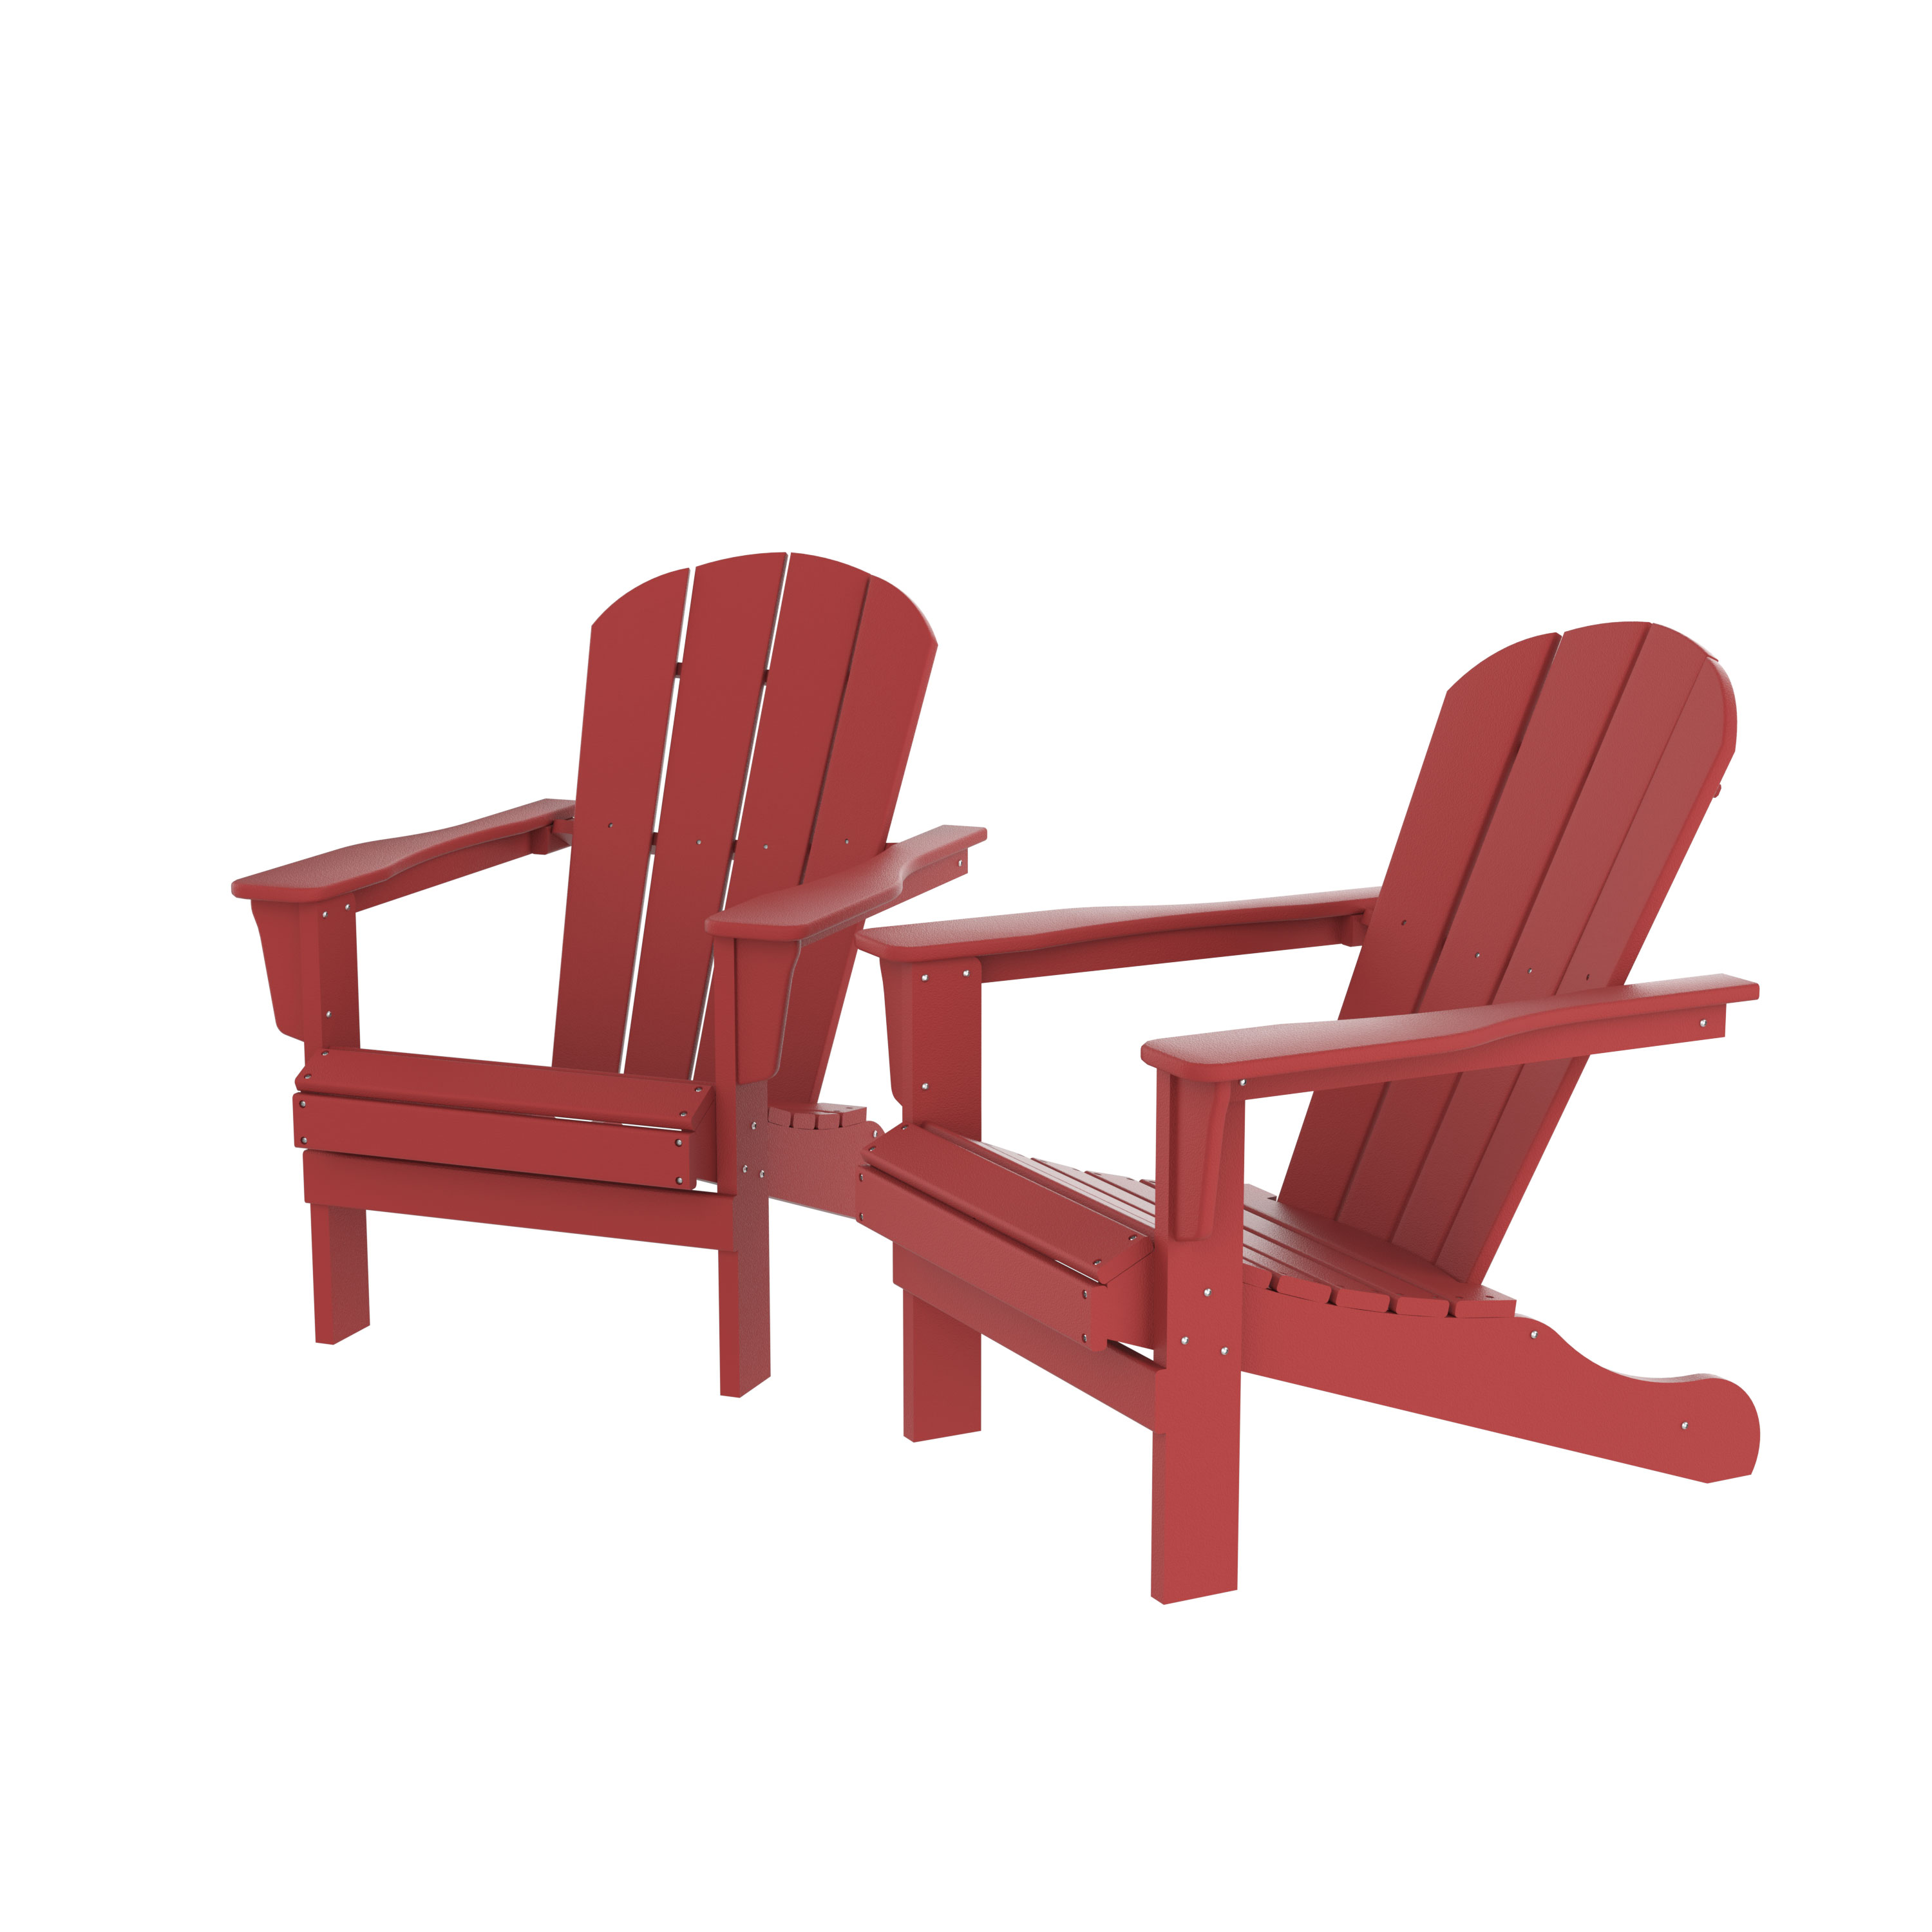 Clearance! HDPE Adirondack Chair, Fire Pit Chairs, Sand Chair, Patio Outdoor Chairs,DPE Plastic Resin Deck Chair, lawn chairs, Adult Size ,Weather Resistant for Patio/ Backyard/Garden, Red, Set of 2 - image 5 of 6